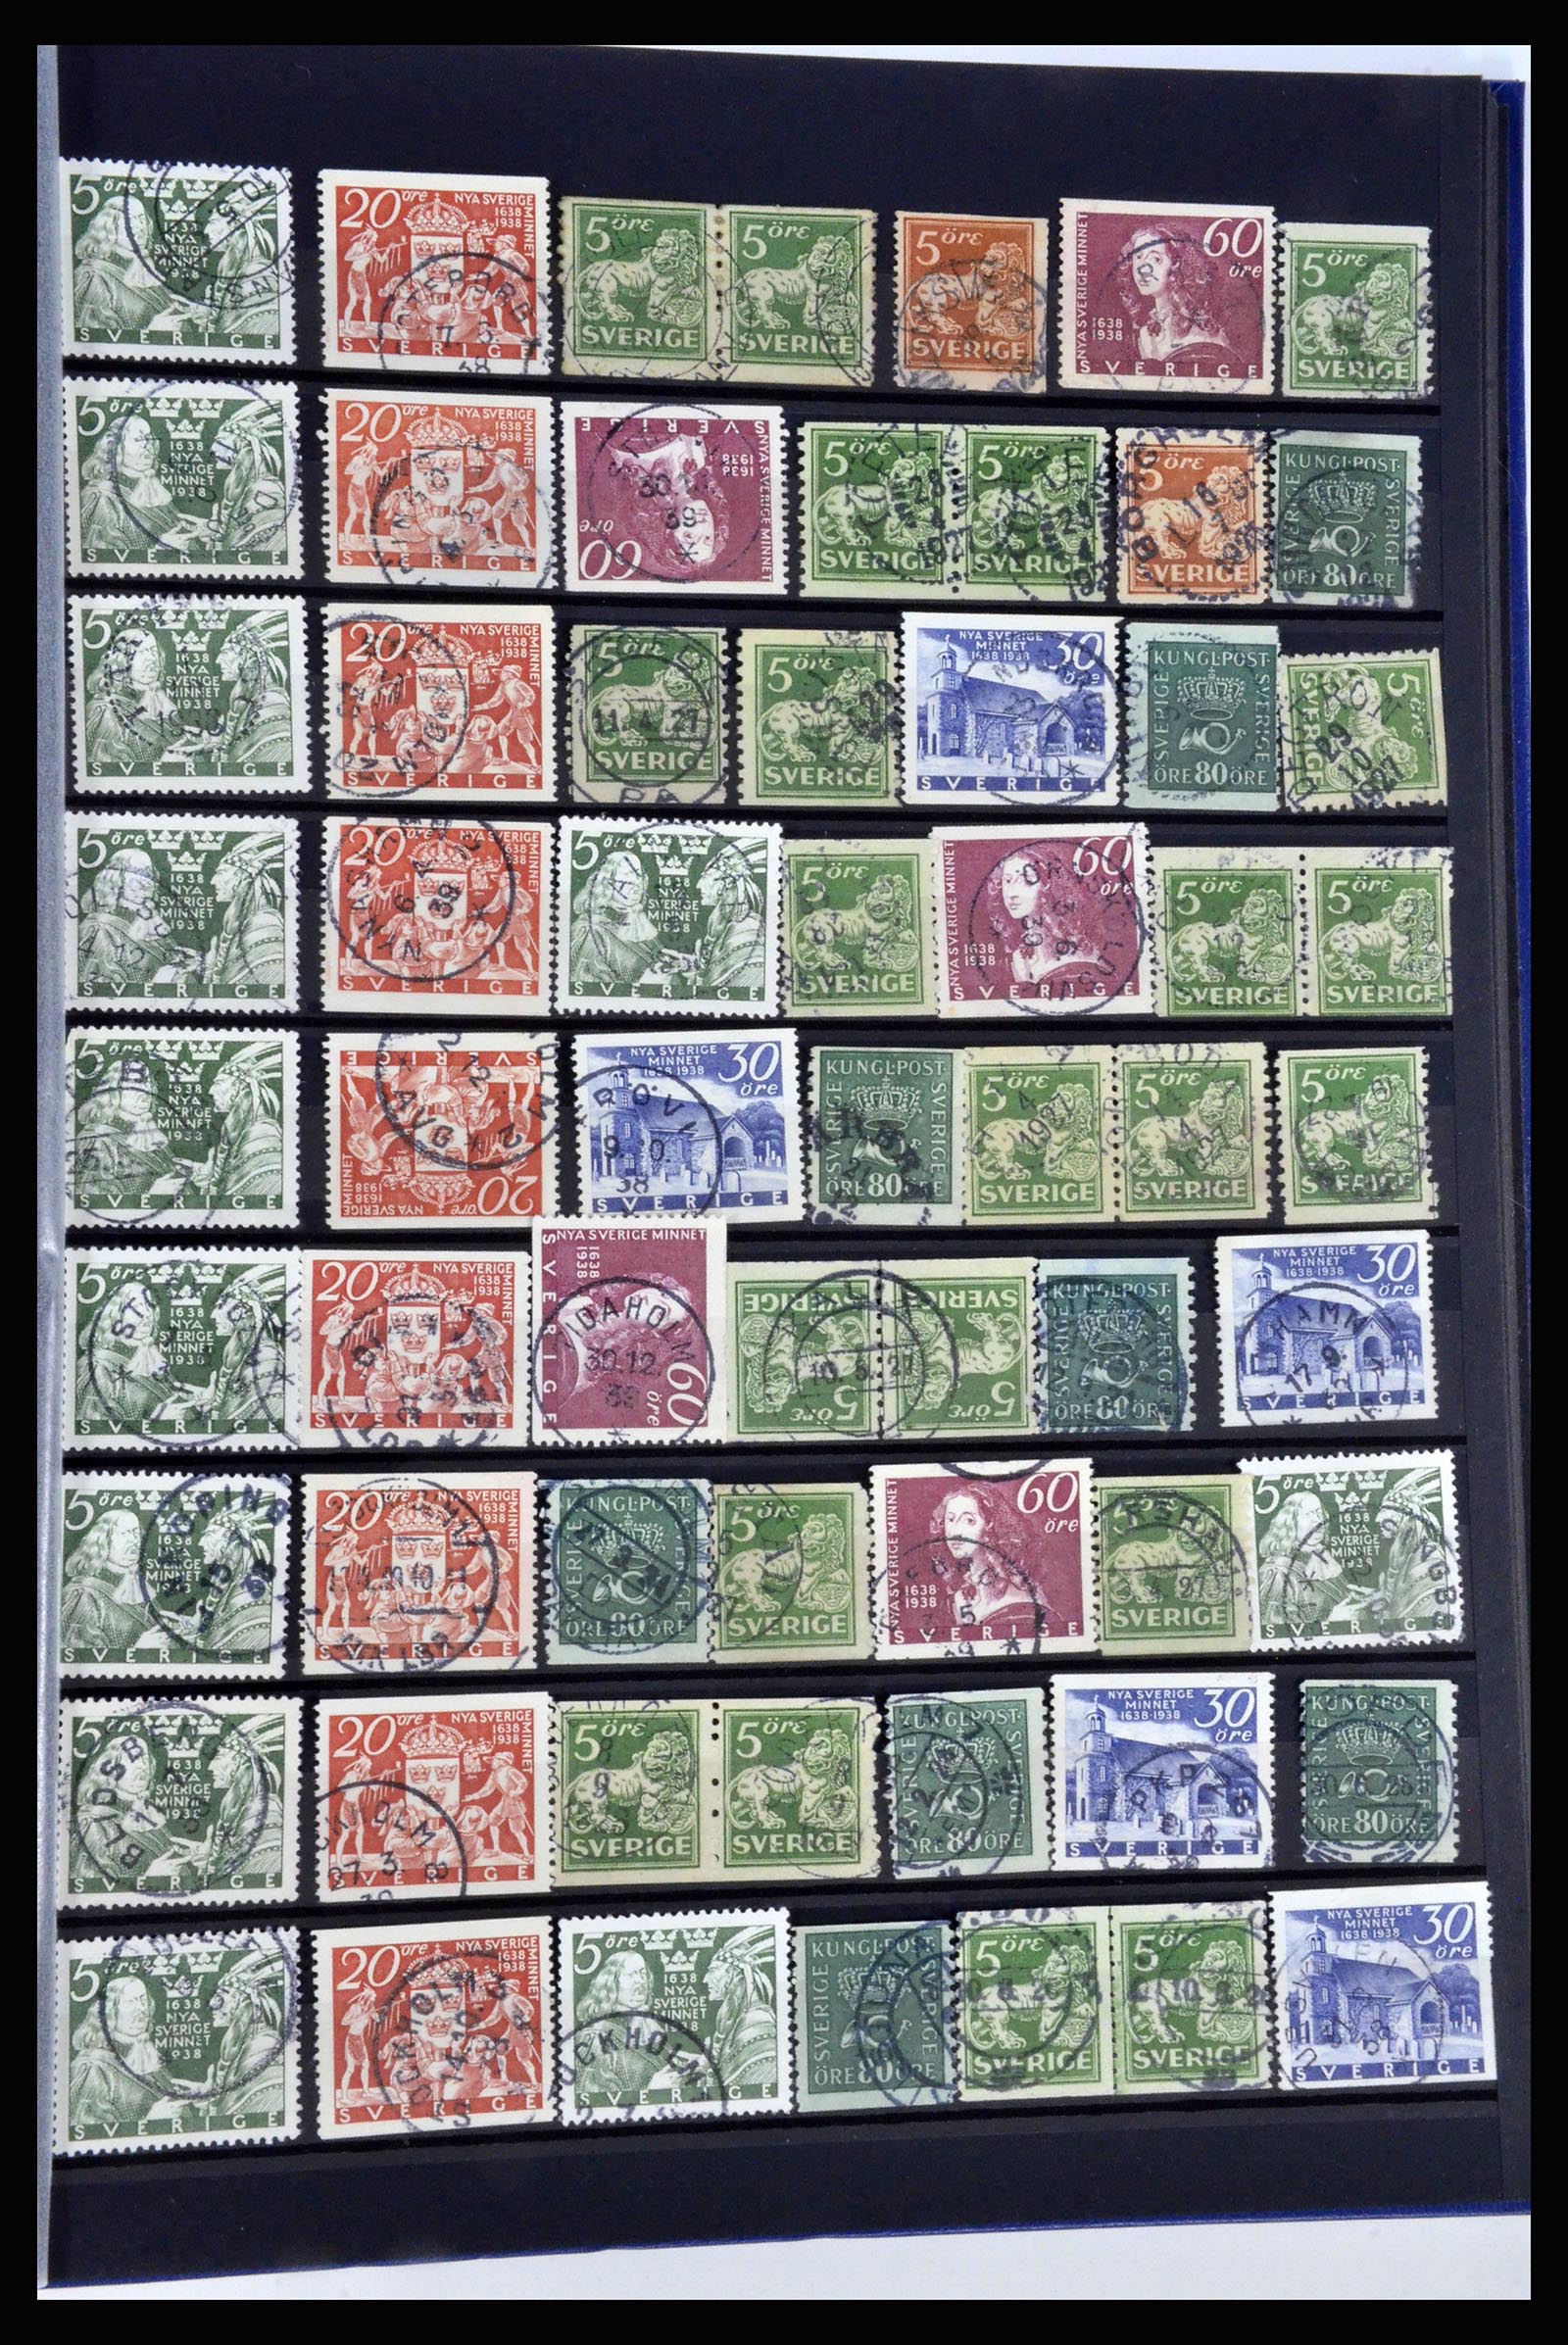 36316 045 - Stamp collection 36316 Sweden cancellations 1920-1938.